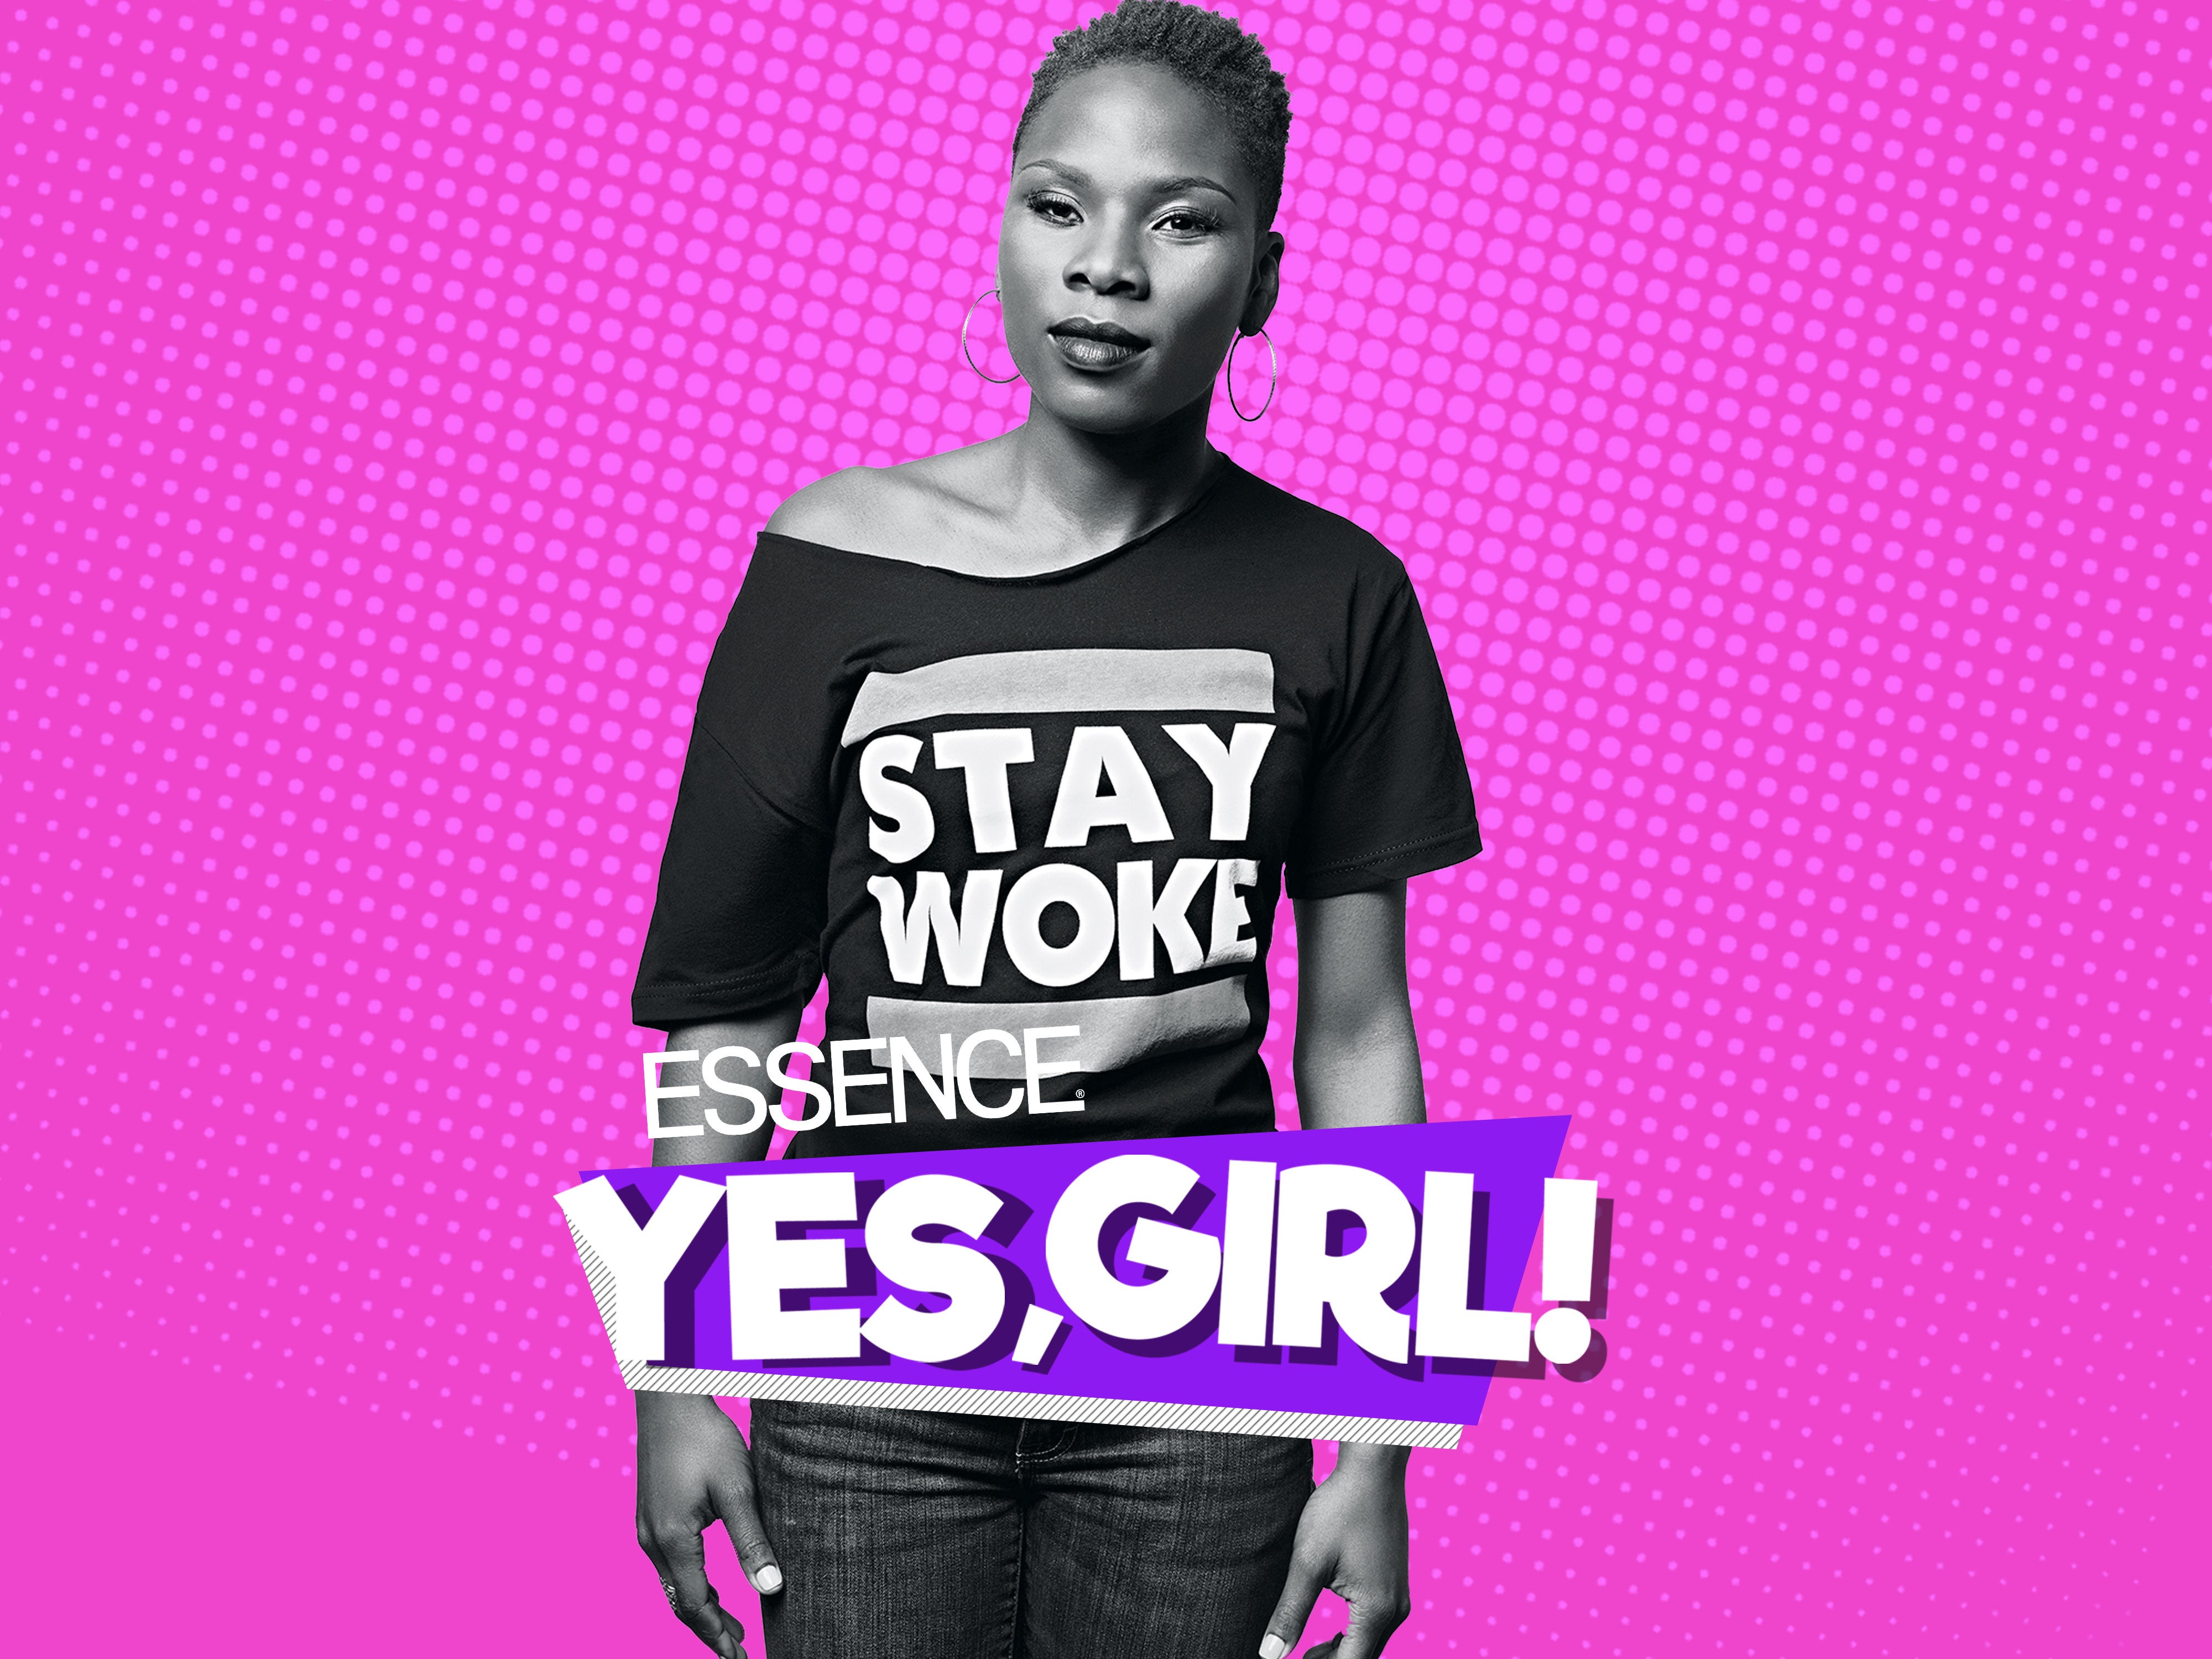 Luvvie Ajayi Gushes Over Shonda Rhimes For The Latest Episode Of ‘Yes, Girl!’